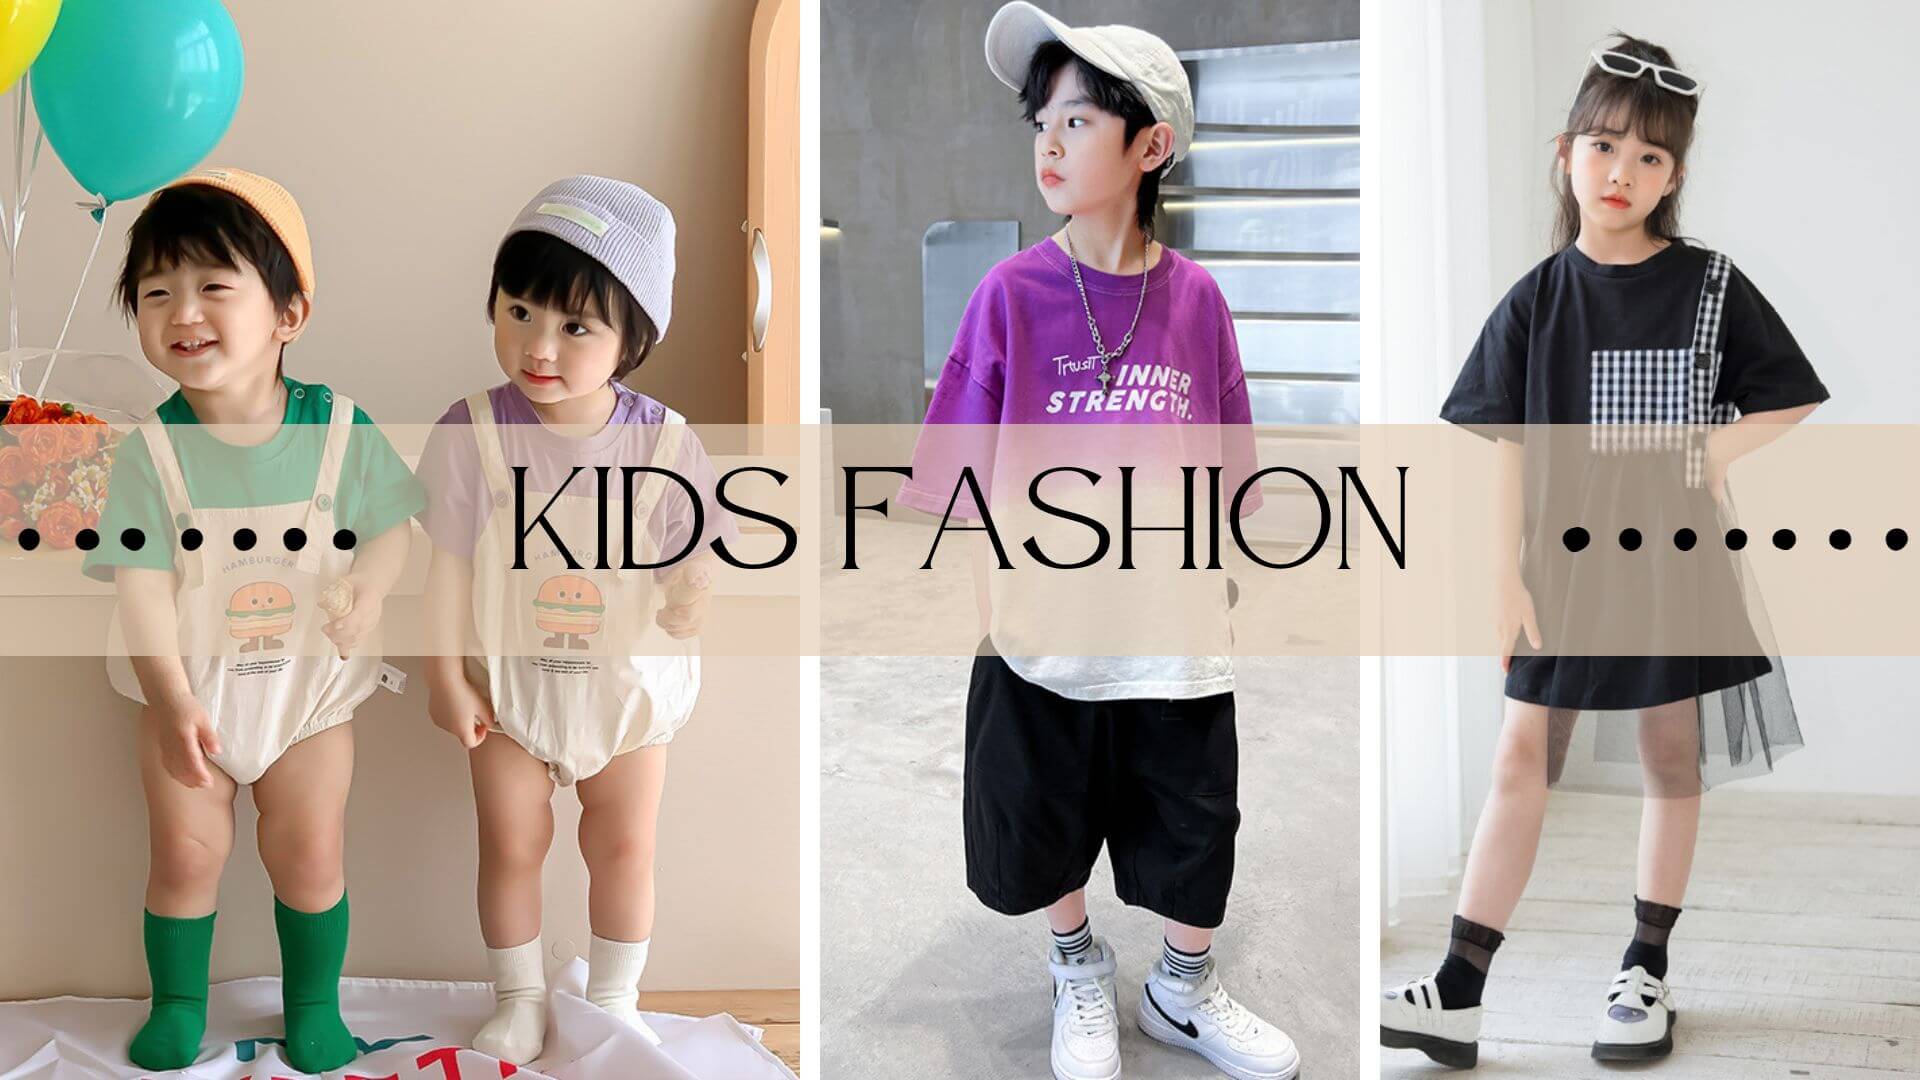 Buy Quality Kid's Fashion Clothes Online